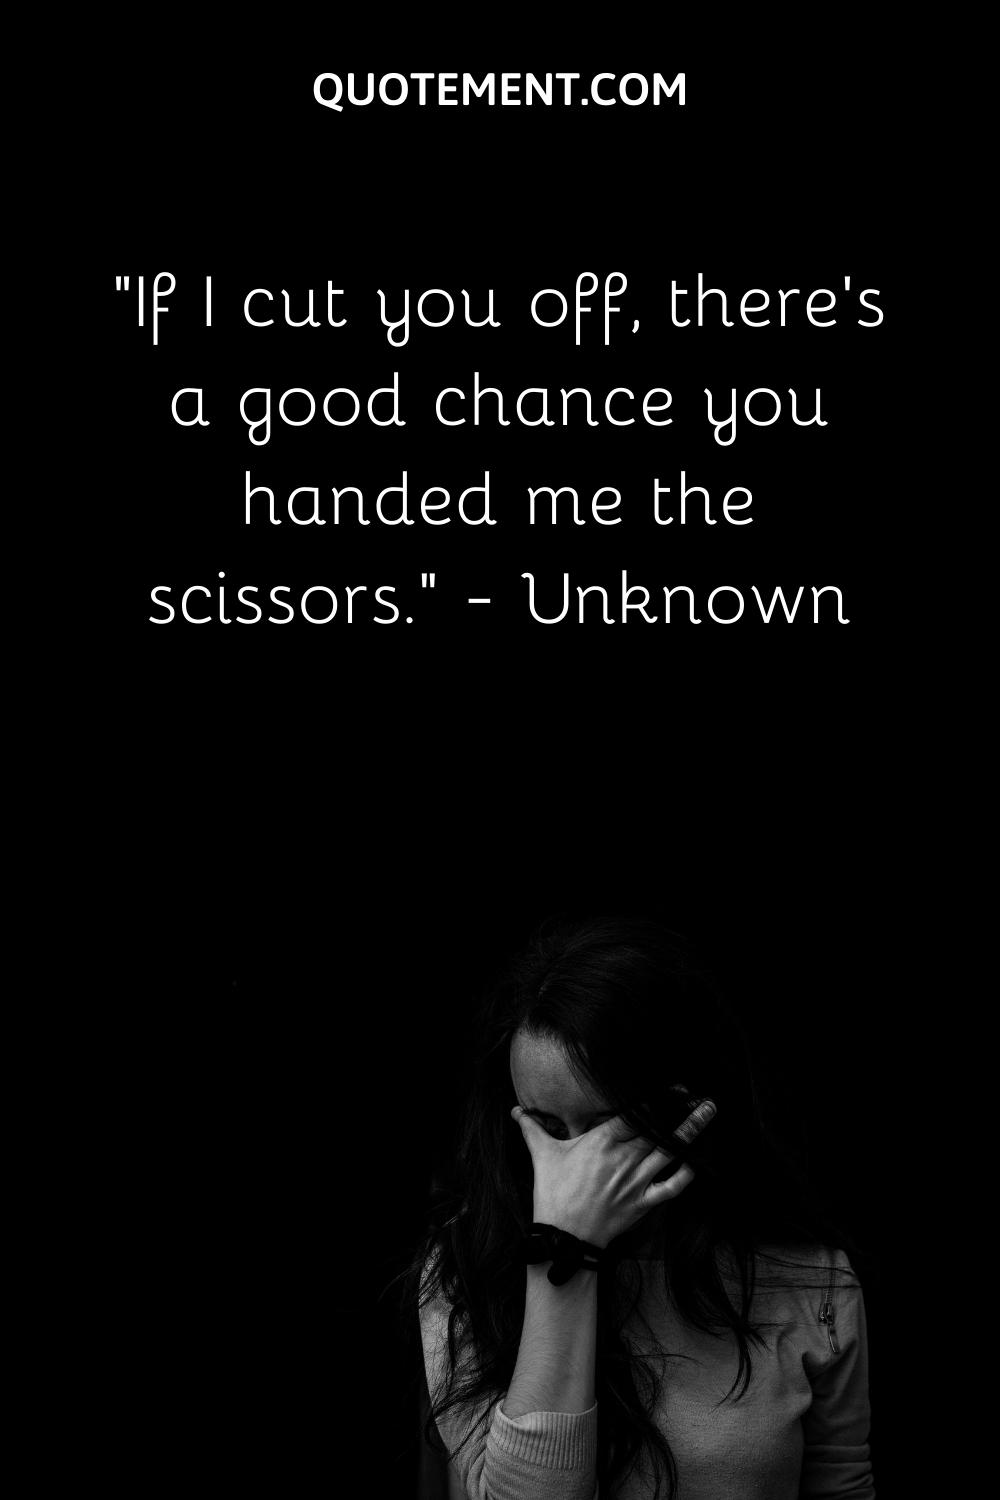 If I cut you off, there’s a good chance you handed me the scissors